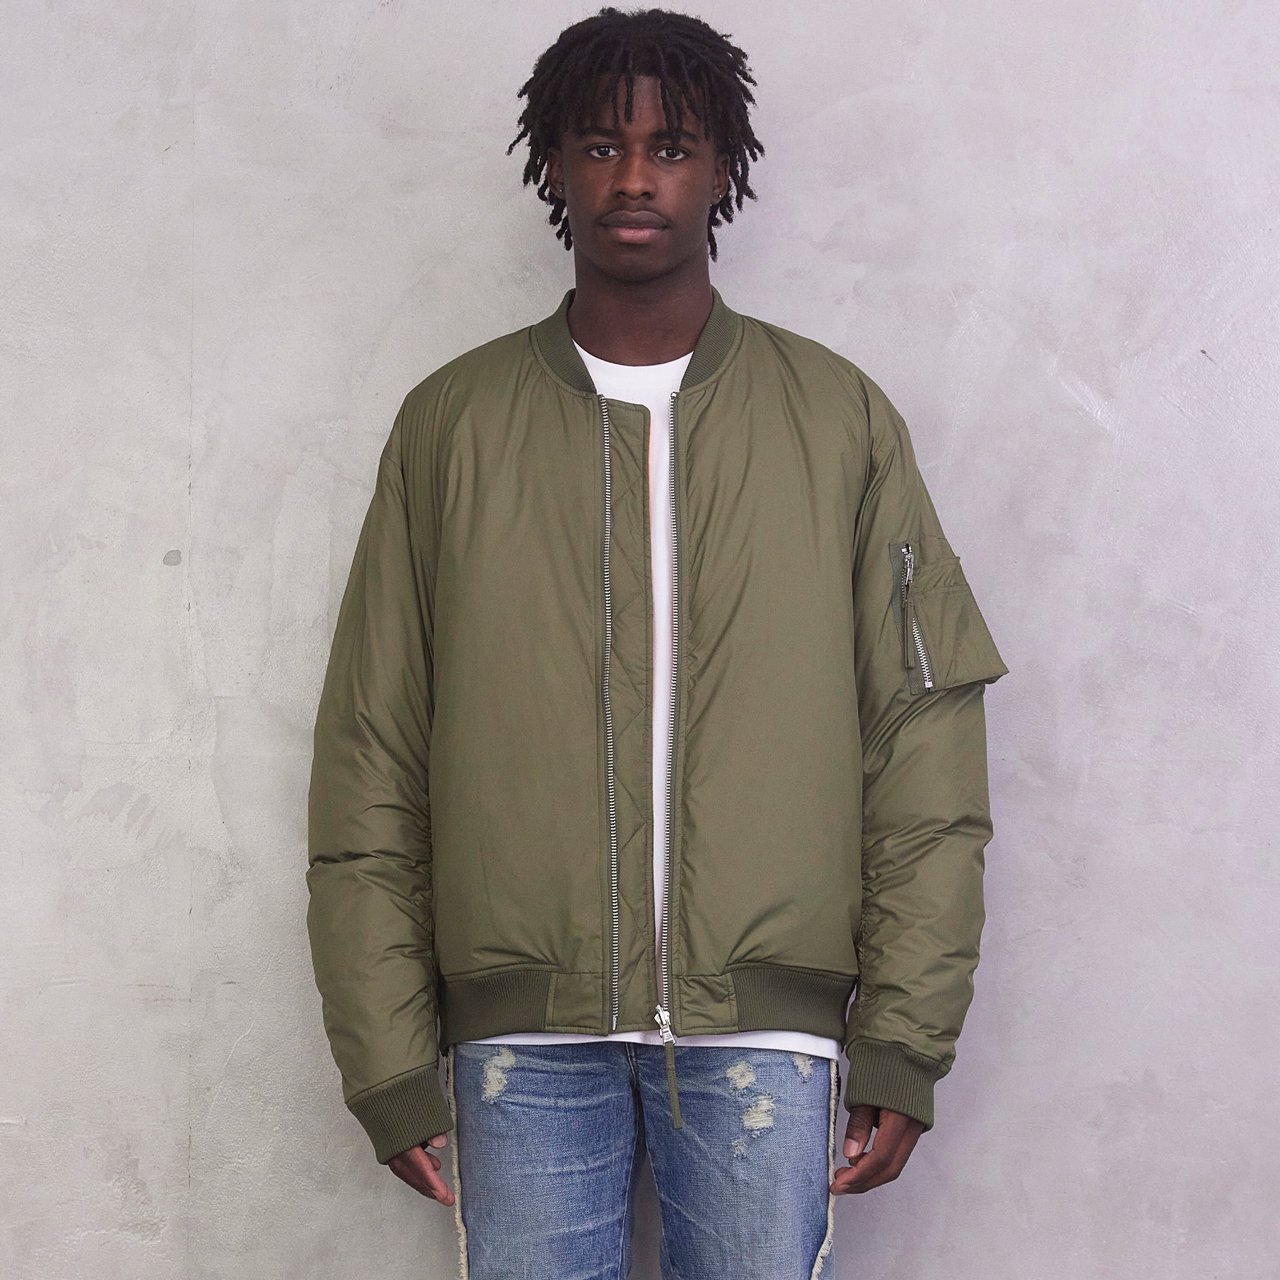 MLVINCE (メルヴィンス)23AW/秋冬
REVERSIBLE LIMONTA DOWN MA-1 OLIVE
リモンタナイロンダウンMA-1 オリーブ